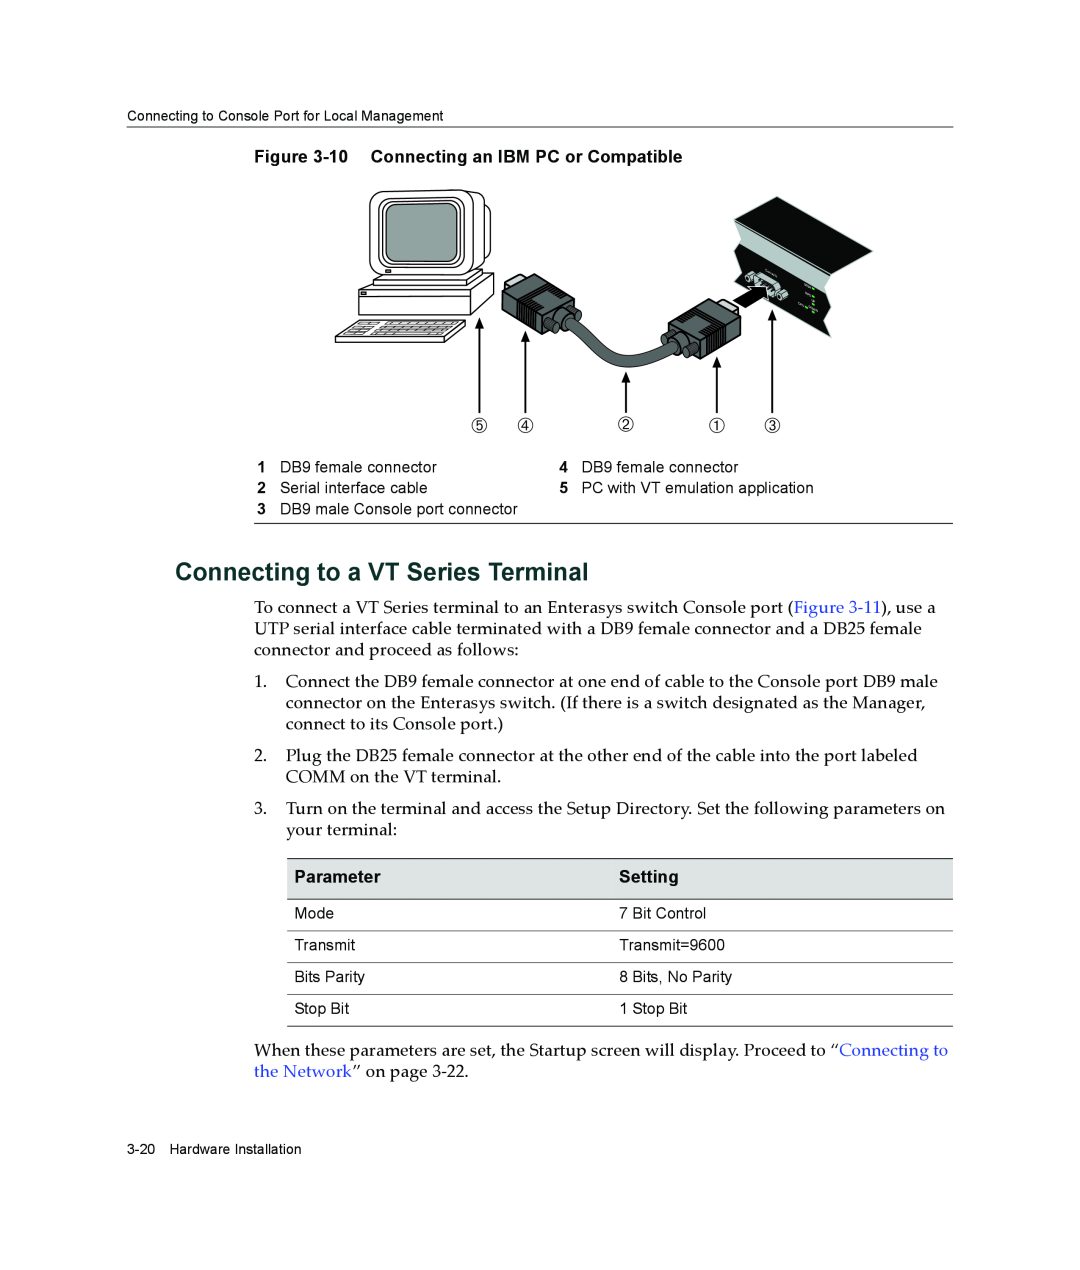 Enterasys Networks B2G124-24 manual Connecting to a VT Series Terminal, PC with VT emulation application 